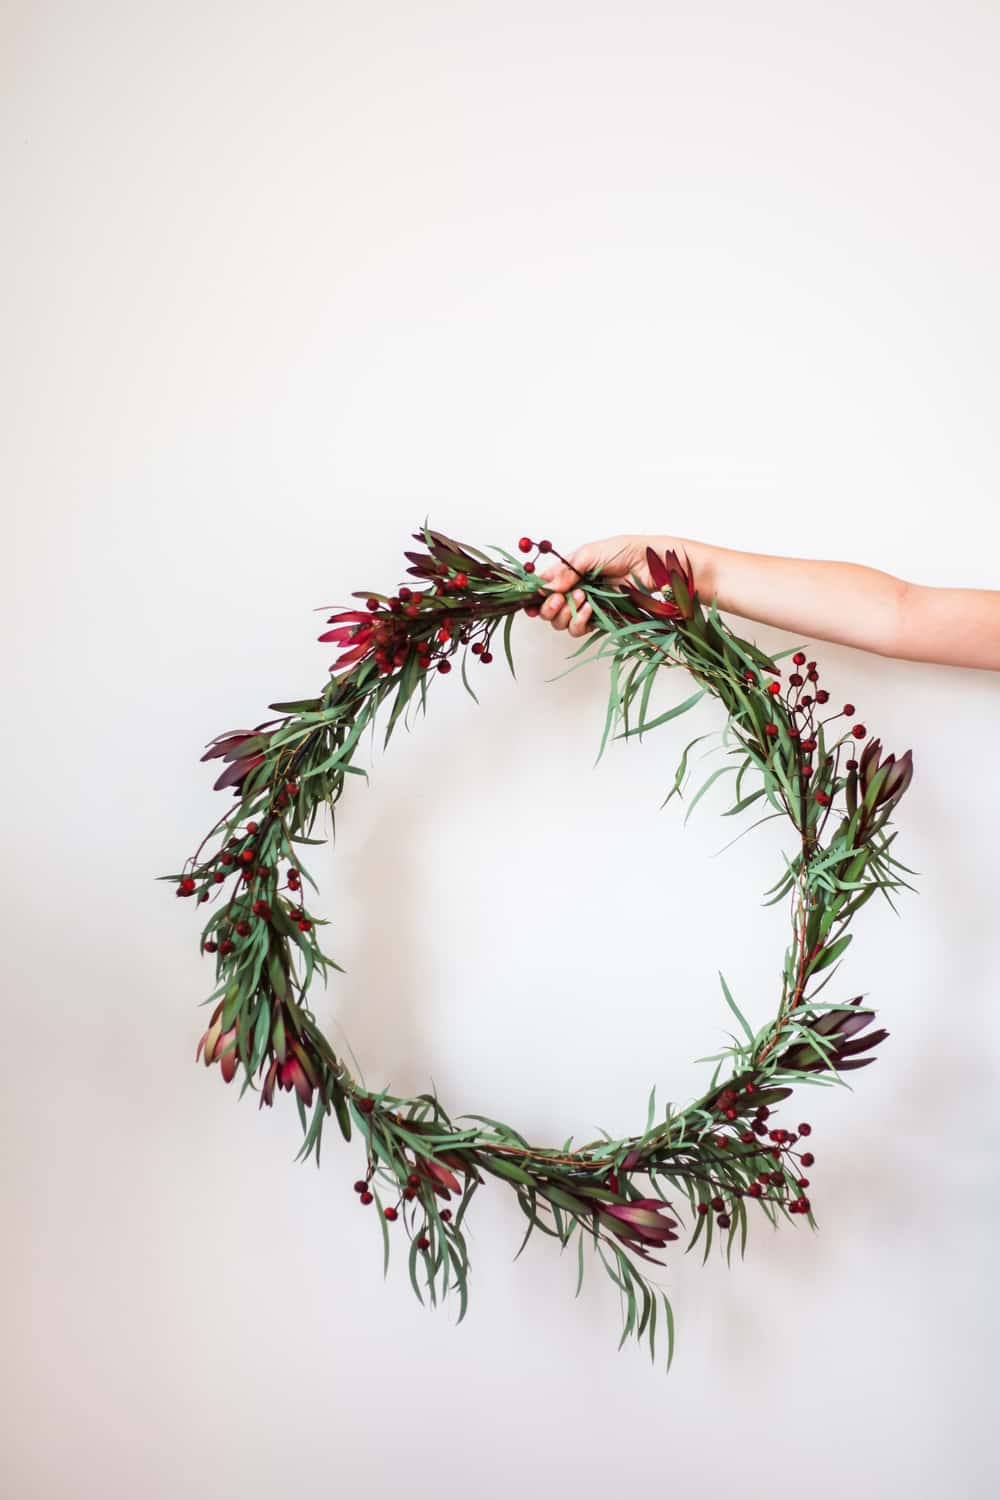 48 Merriest Christmas Decoration Ideas That Reveal The Holiday Spirit